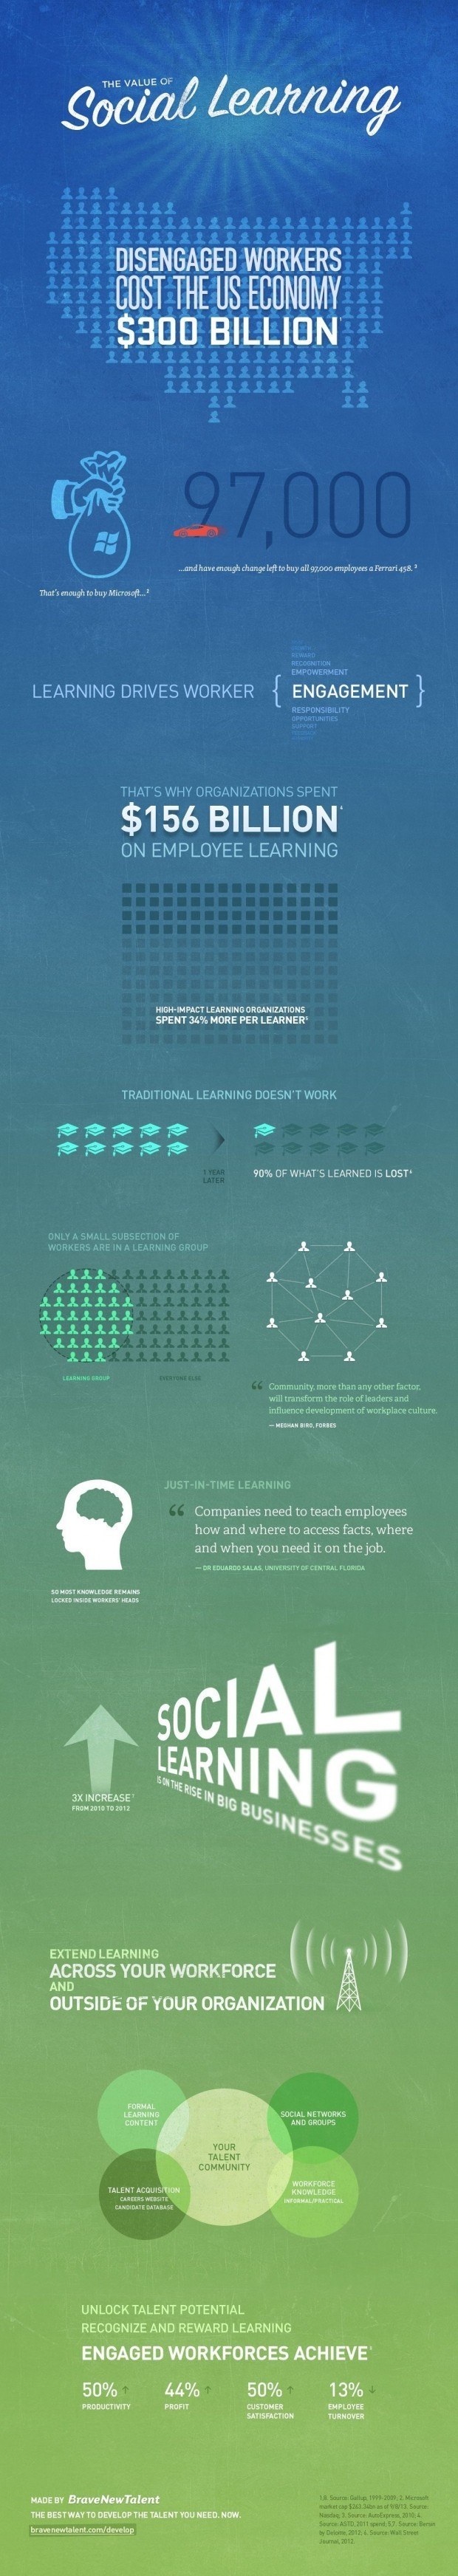 The Value of Social Learning Infographic thumbnail